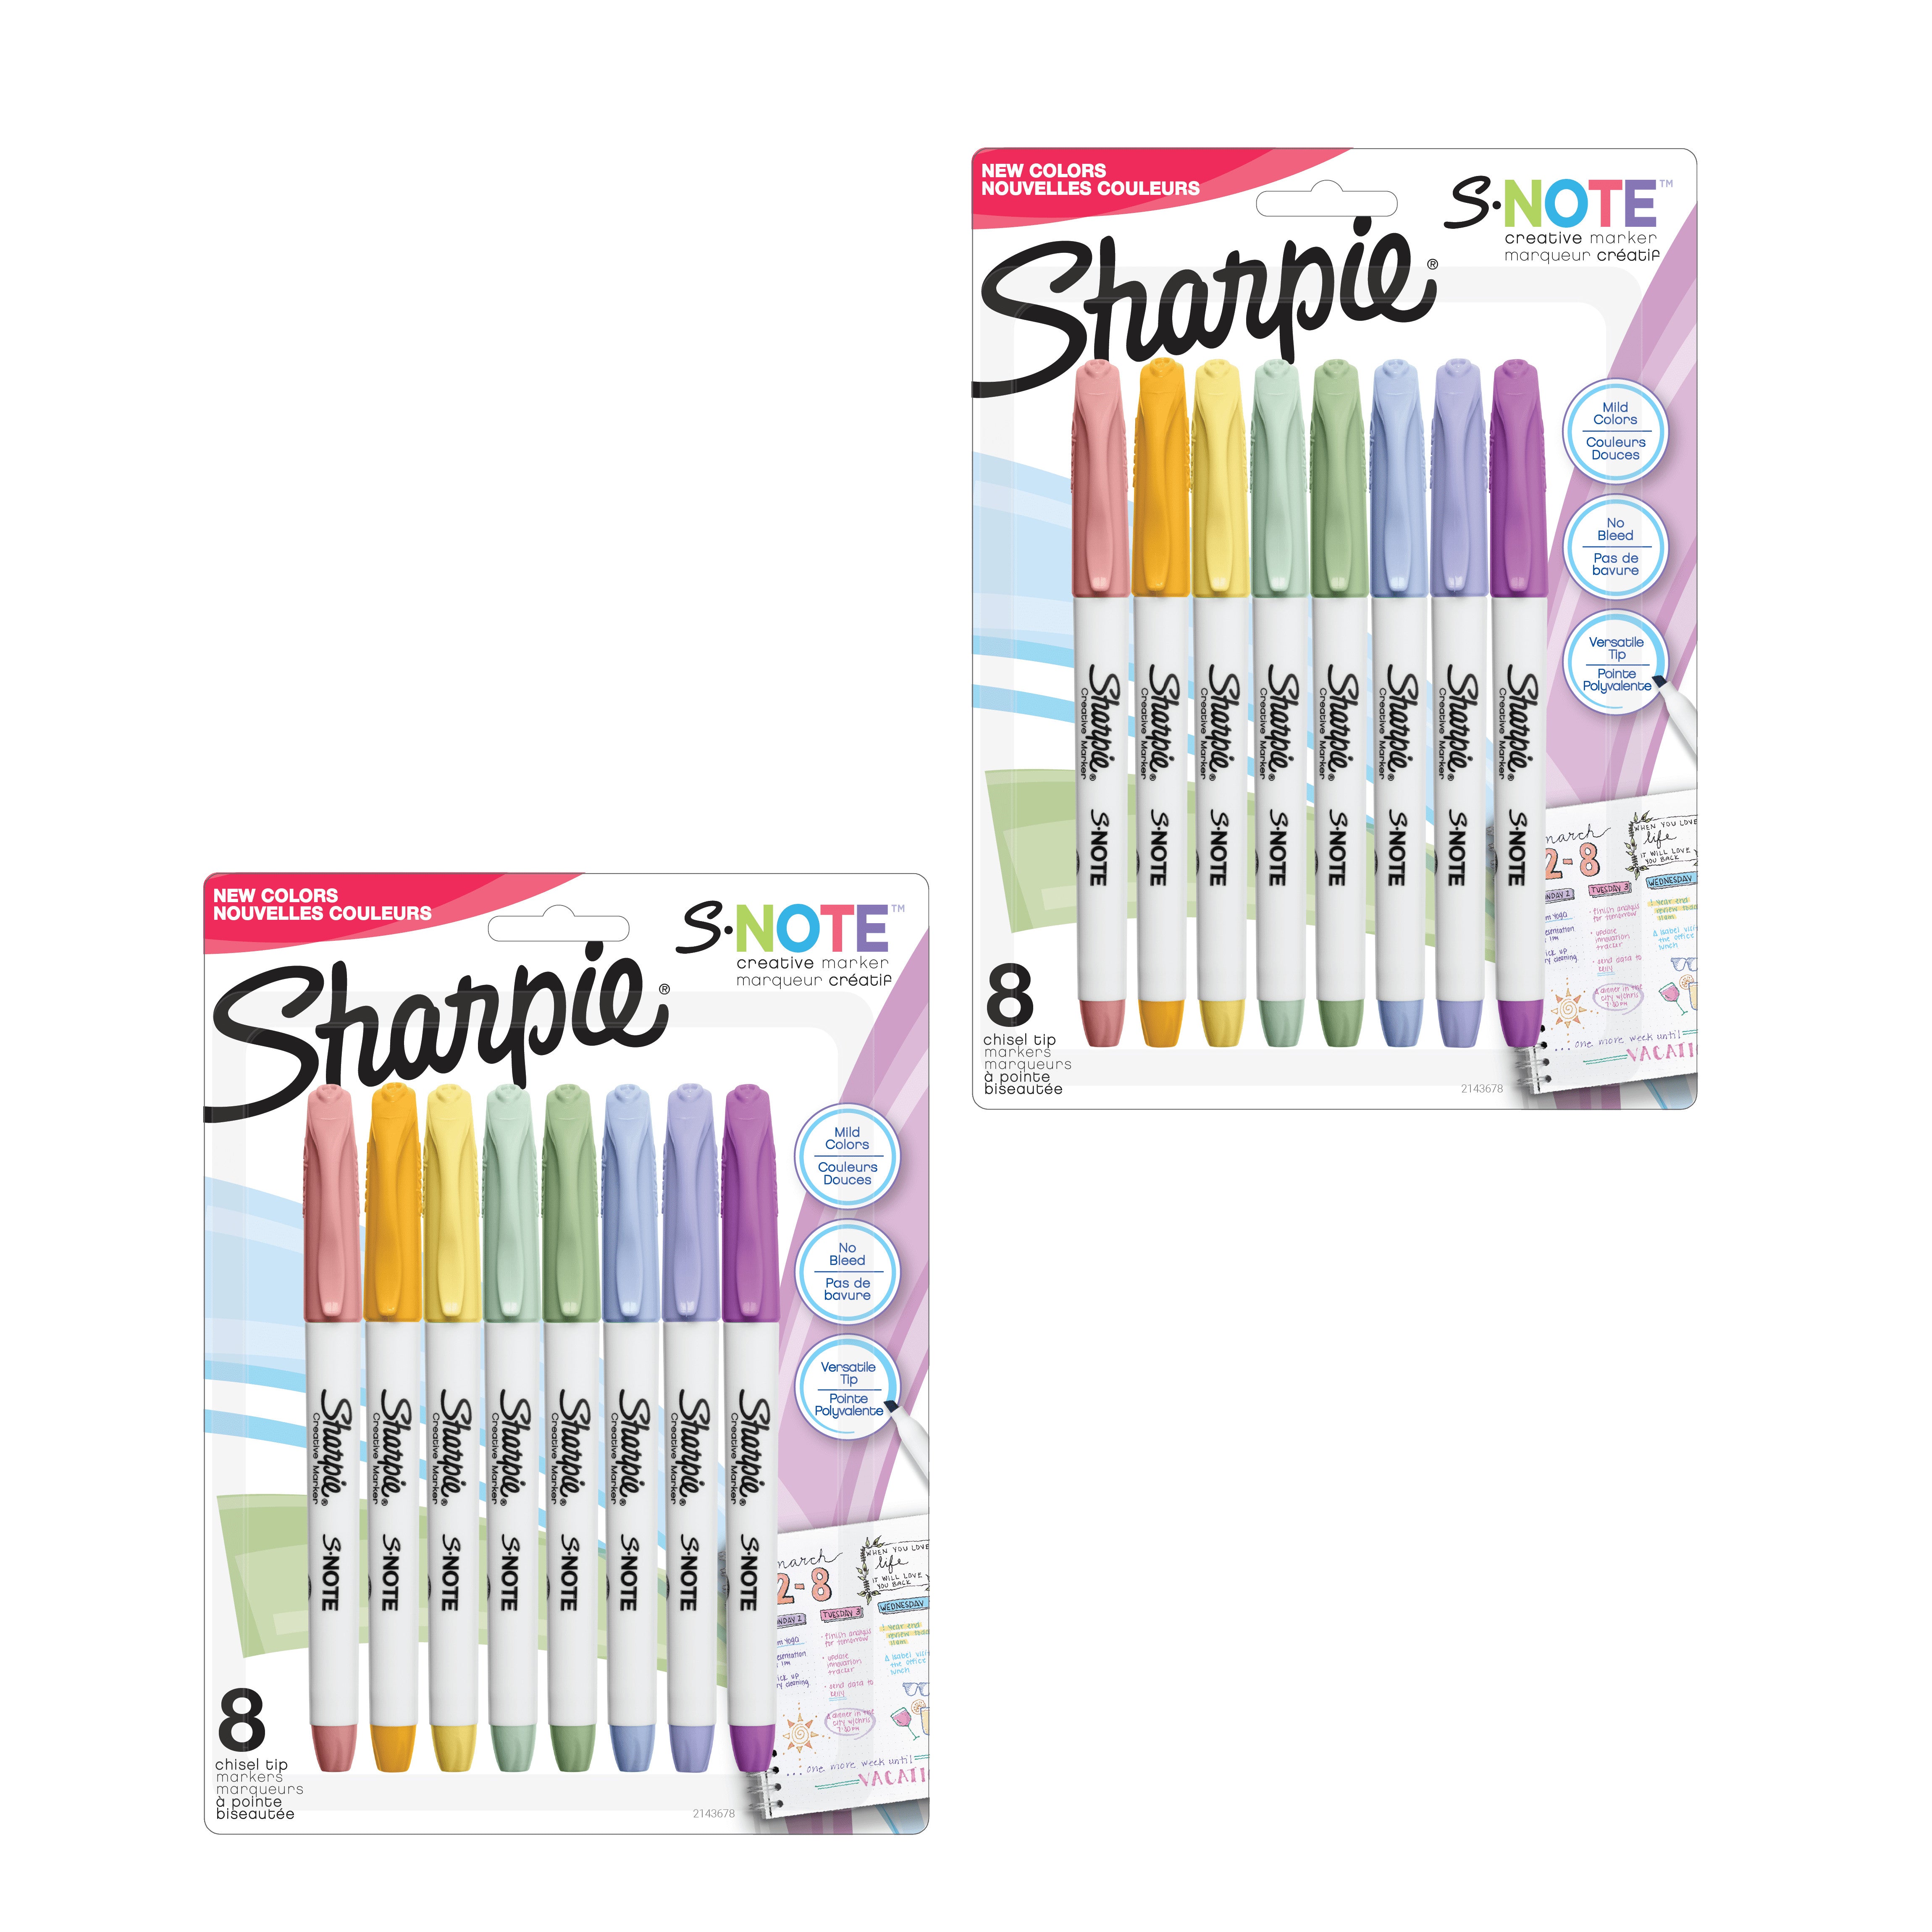 Sharpie S-Note Creative Markers with Chisel Tip, 2 Packs of 8